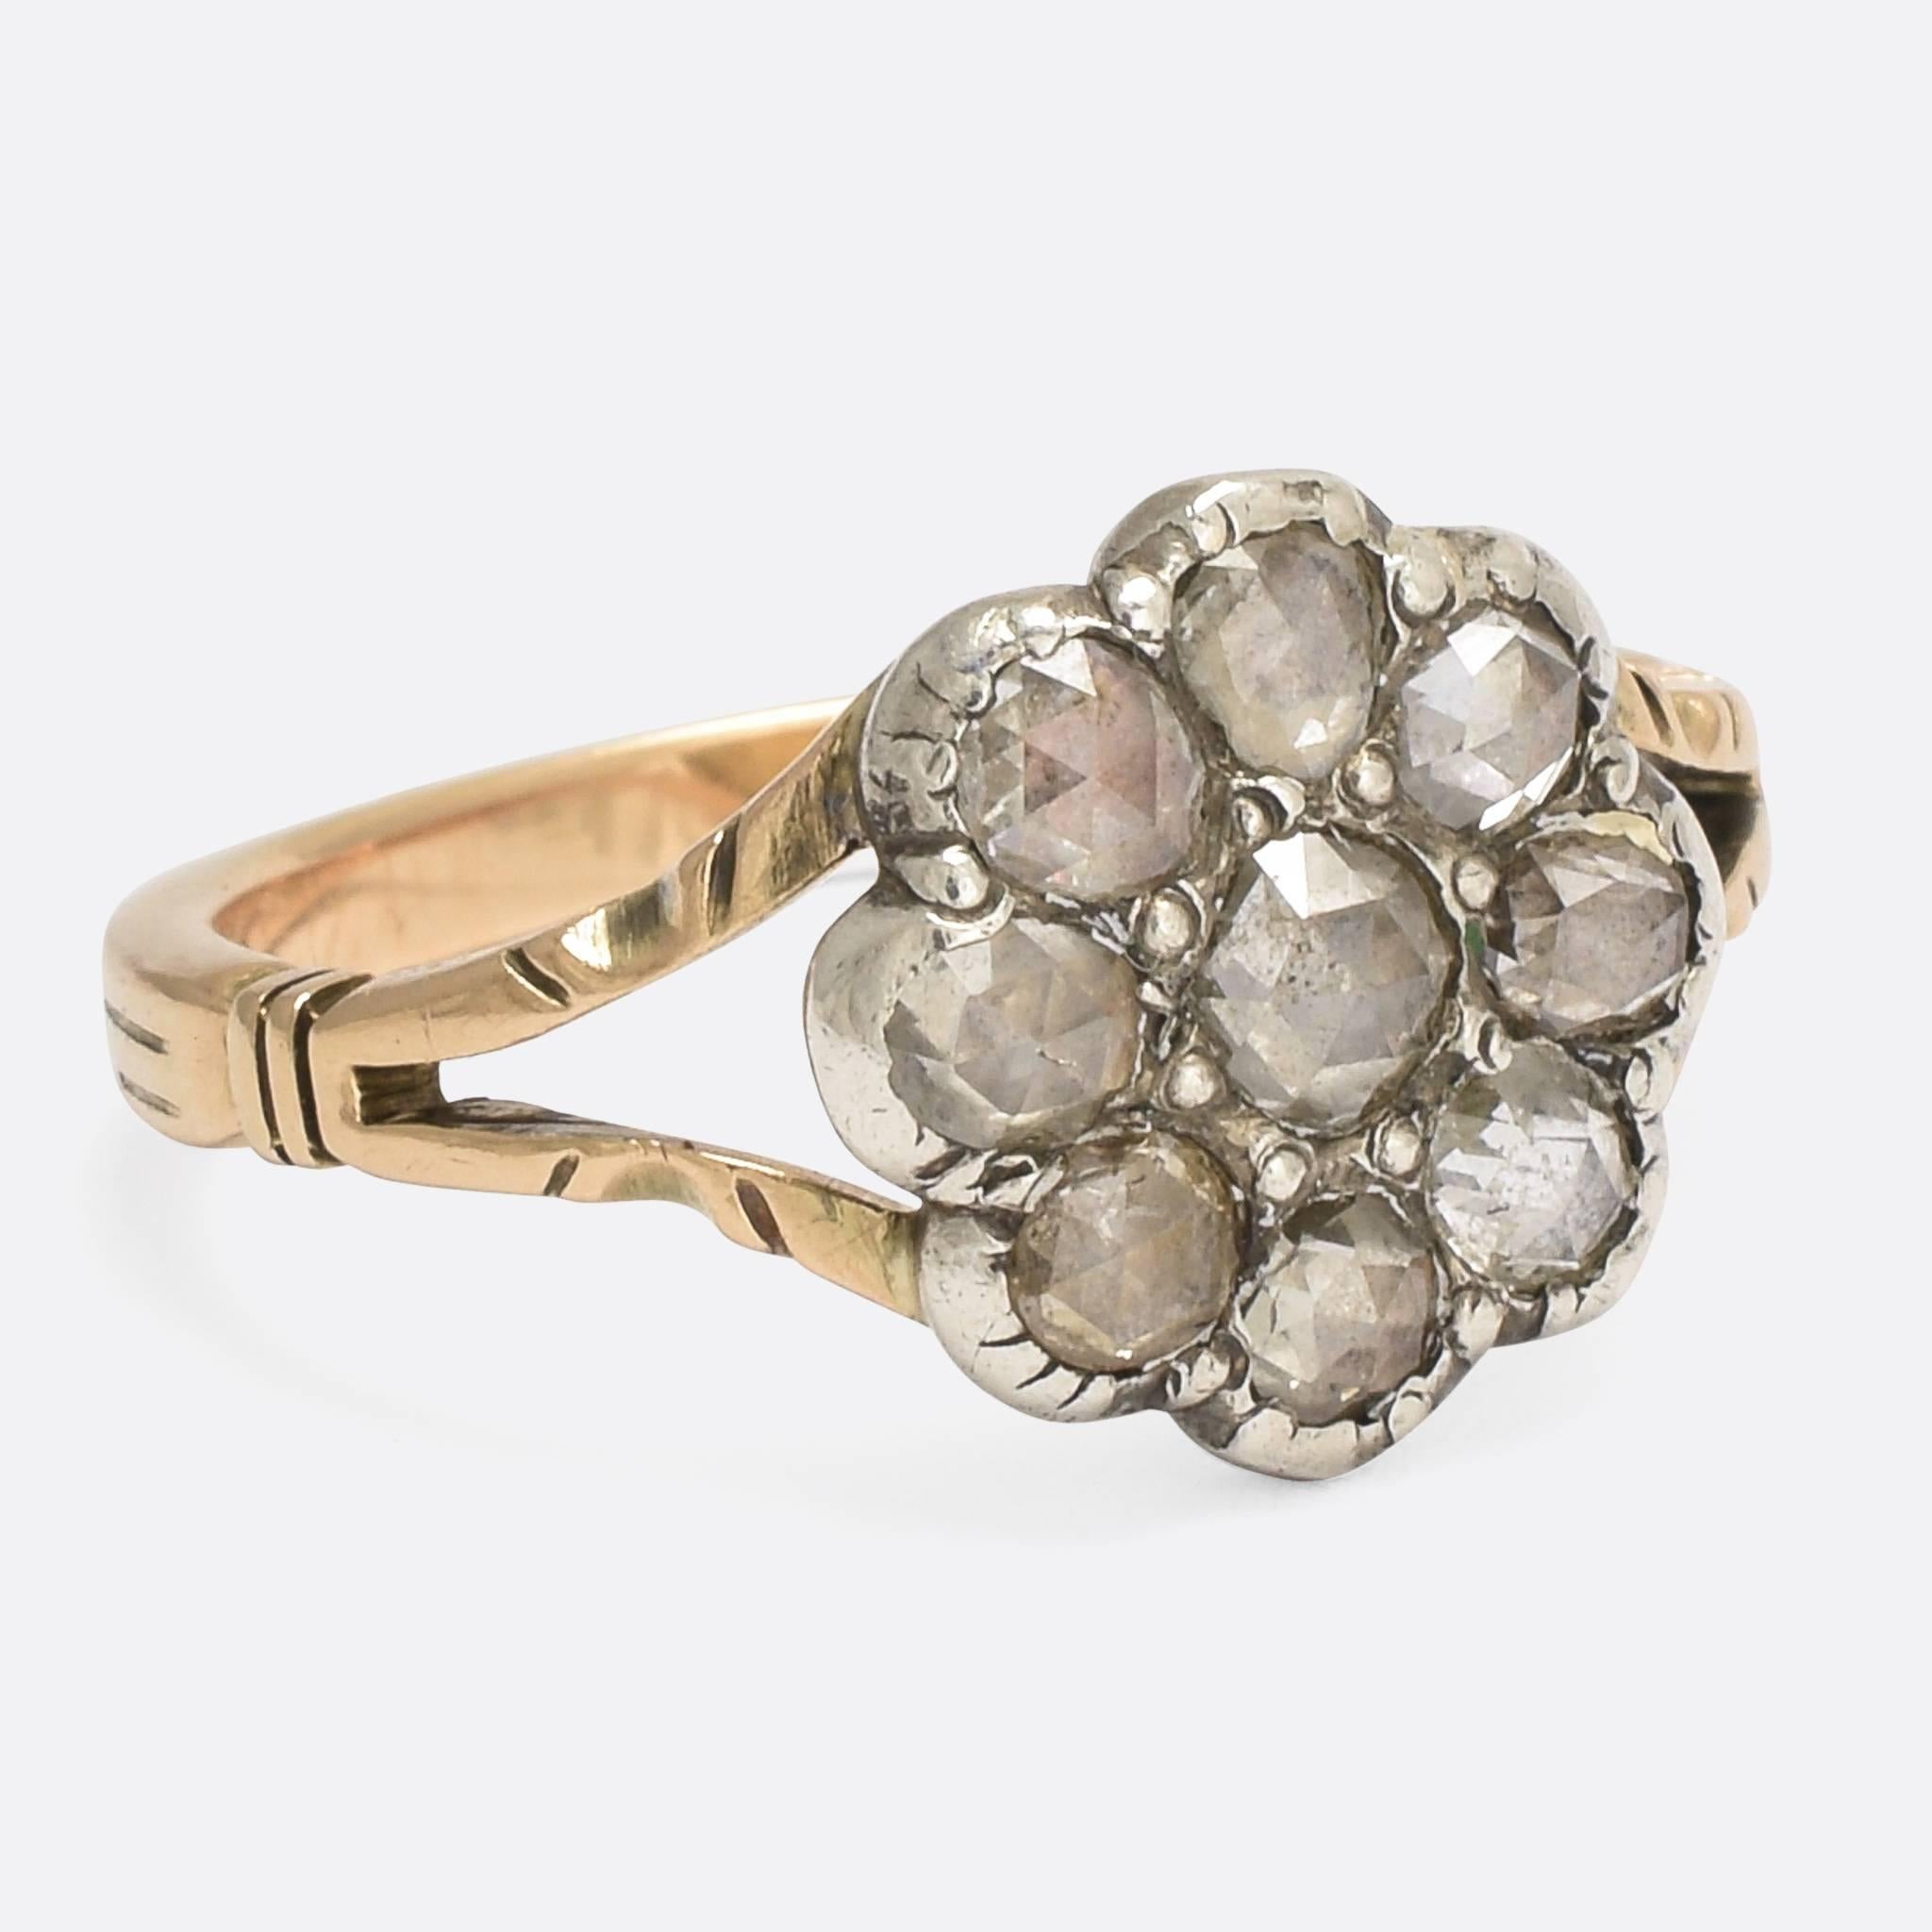 A beautiful Georgian flower ring, set with perfect, highly domed, rose cut diamonds. This one's more dainty than usual from this era, with elegant split shoulders and a reeded yellow gold band. The stones rest in foil-backed silver settings, further